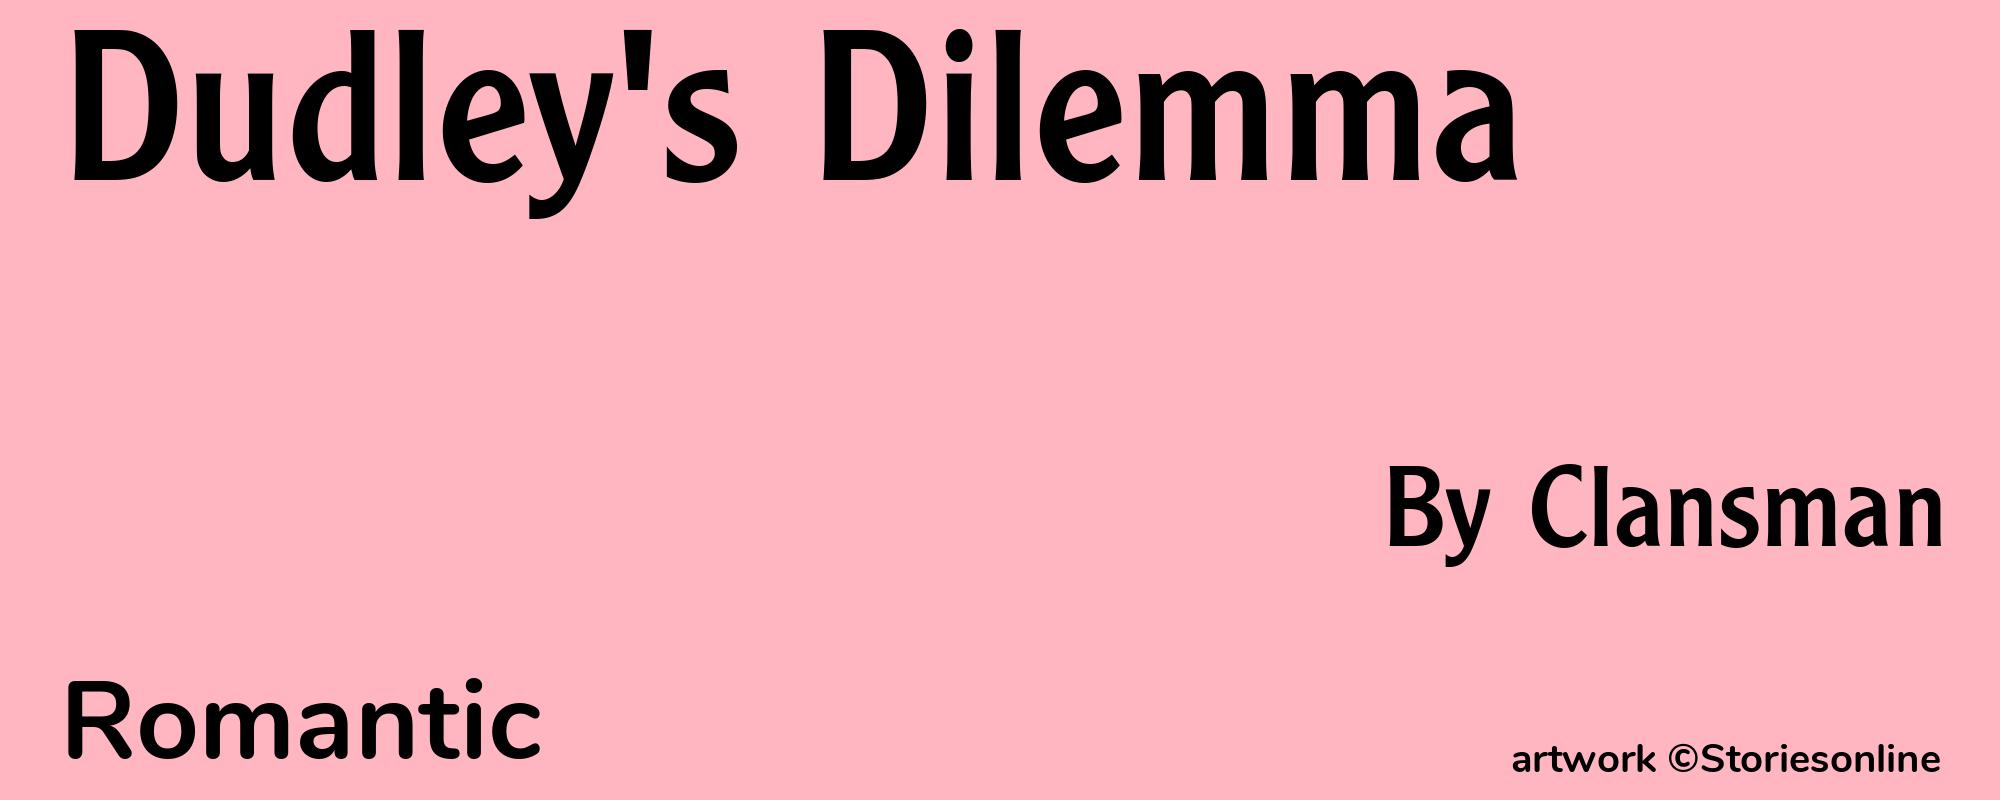 Dudley's Dilemma - Cover